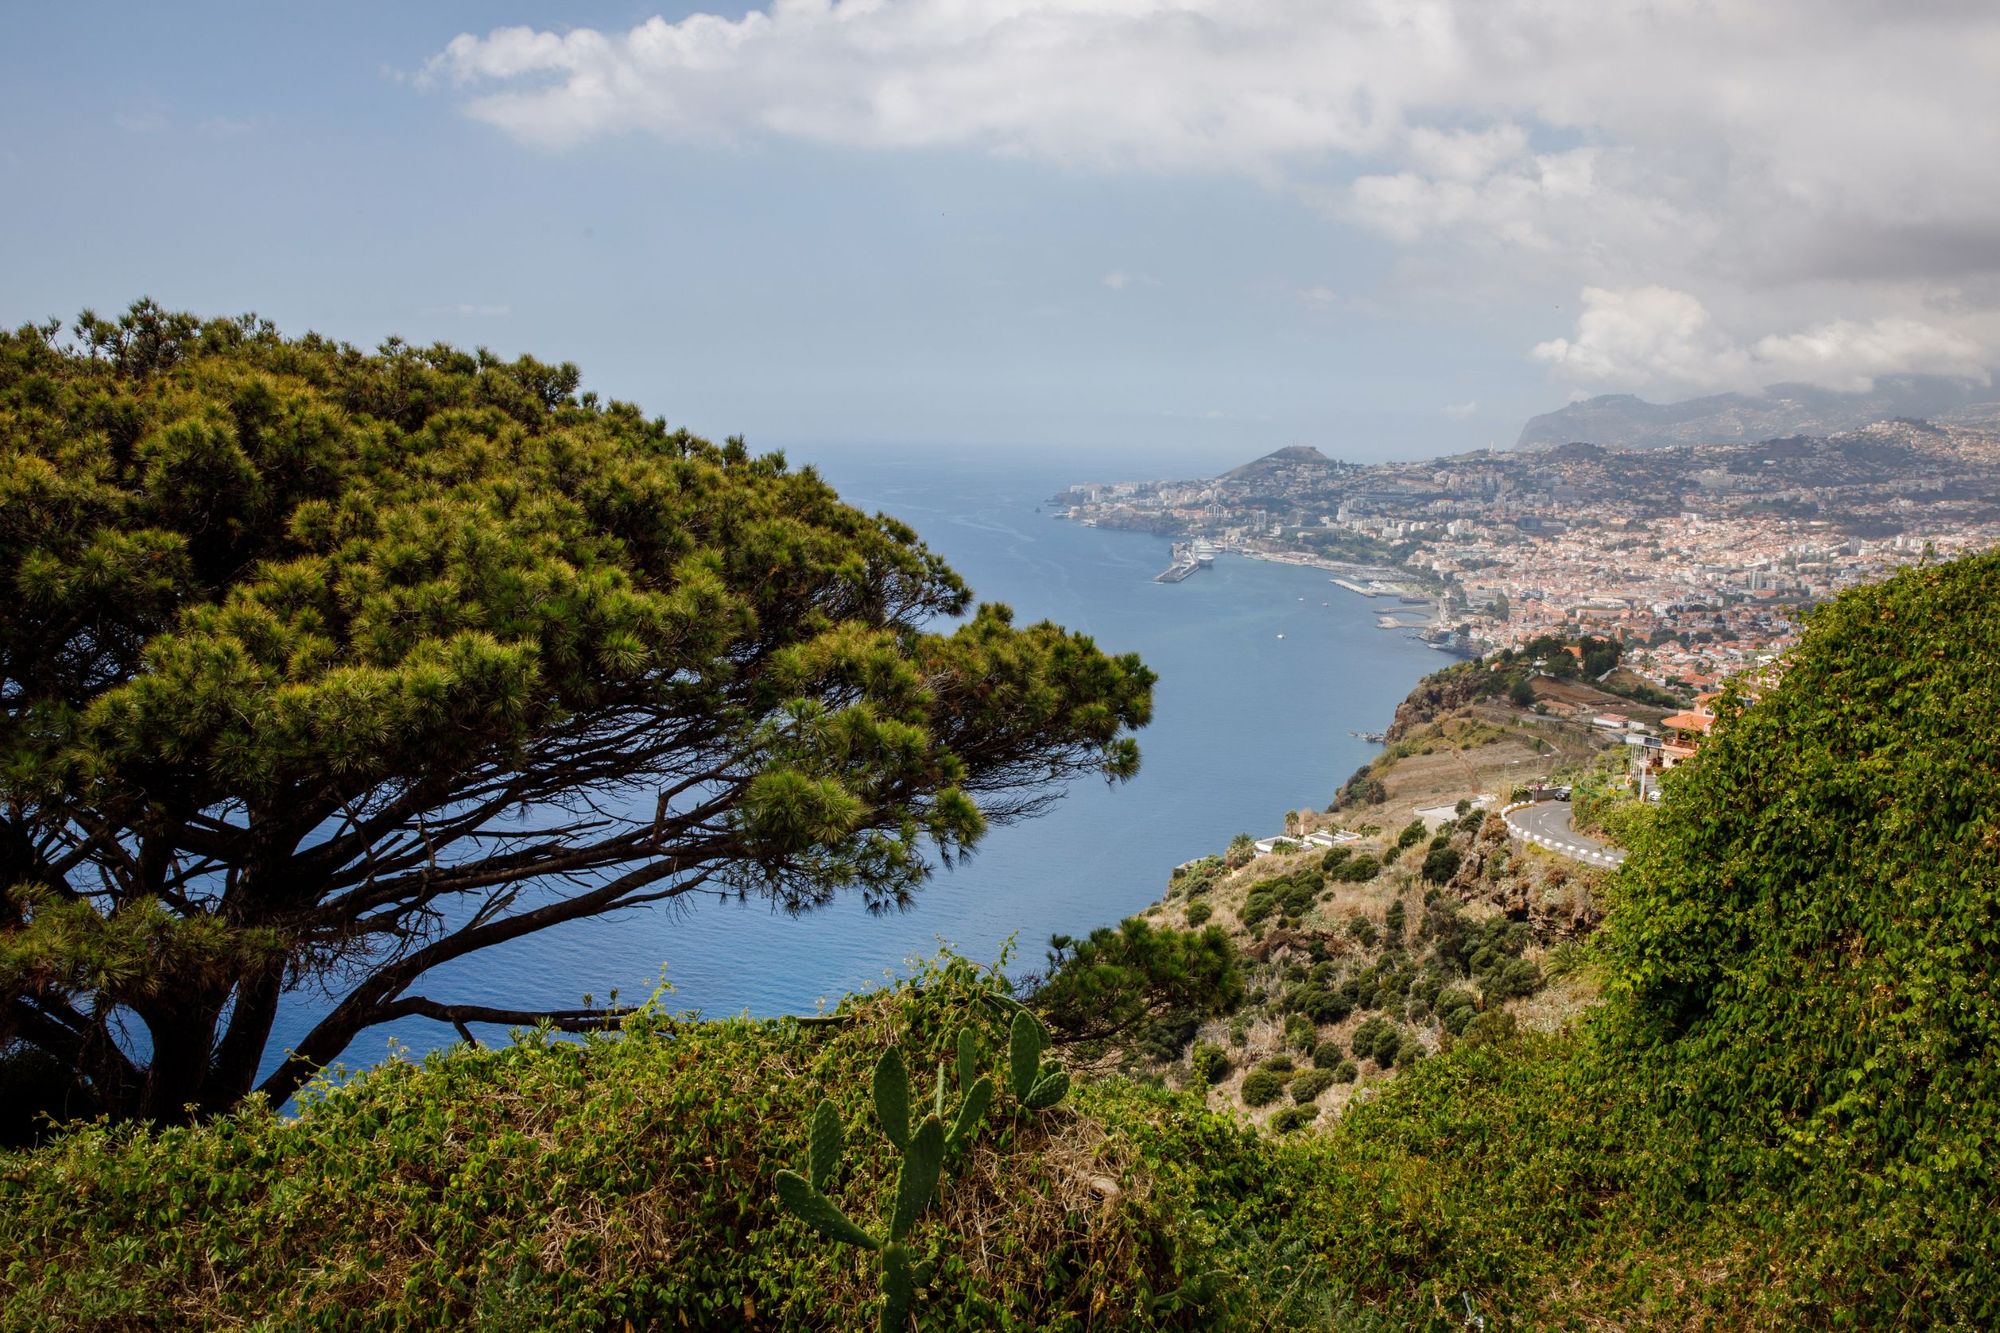 An example view of Funchal (not taken from the PR4 route). Photo: Getty